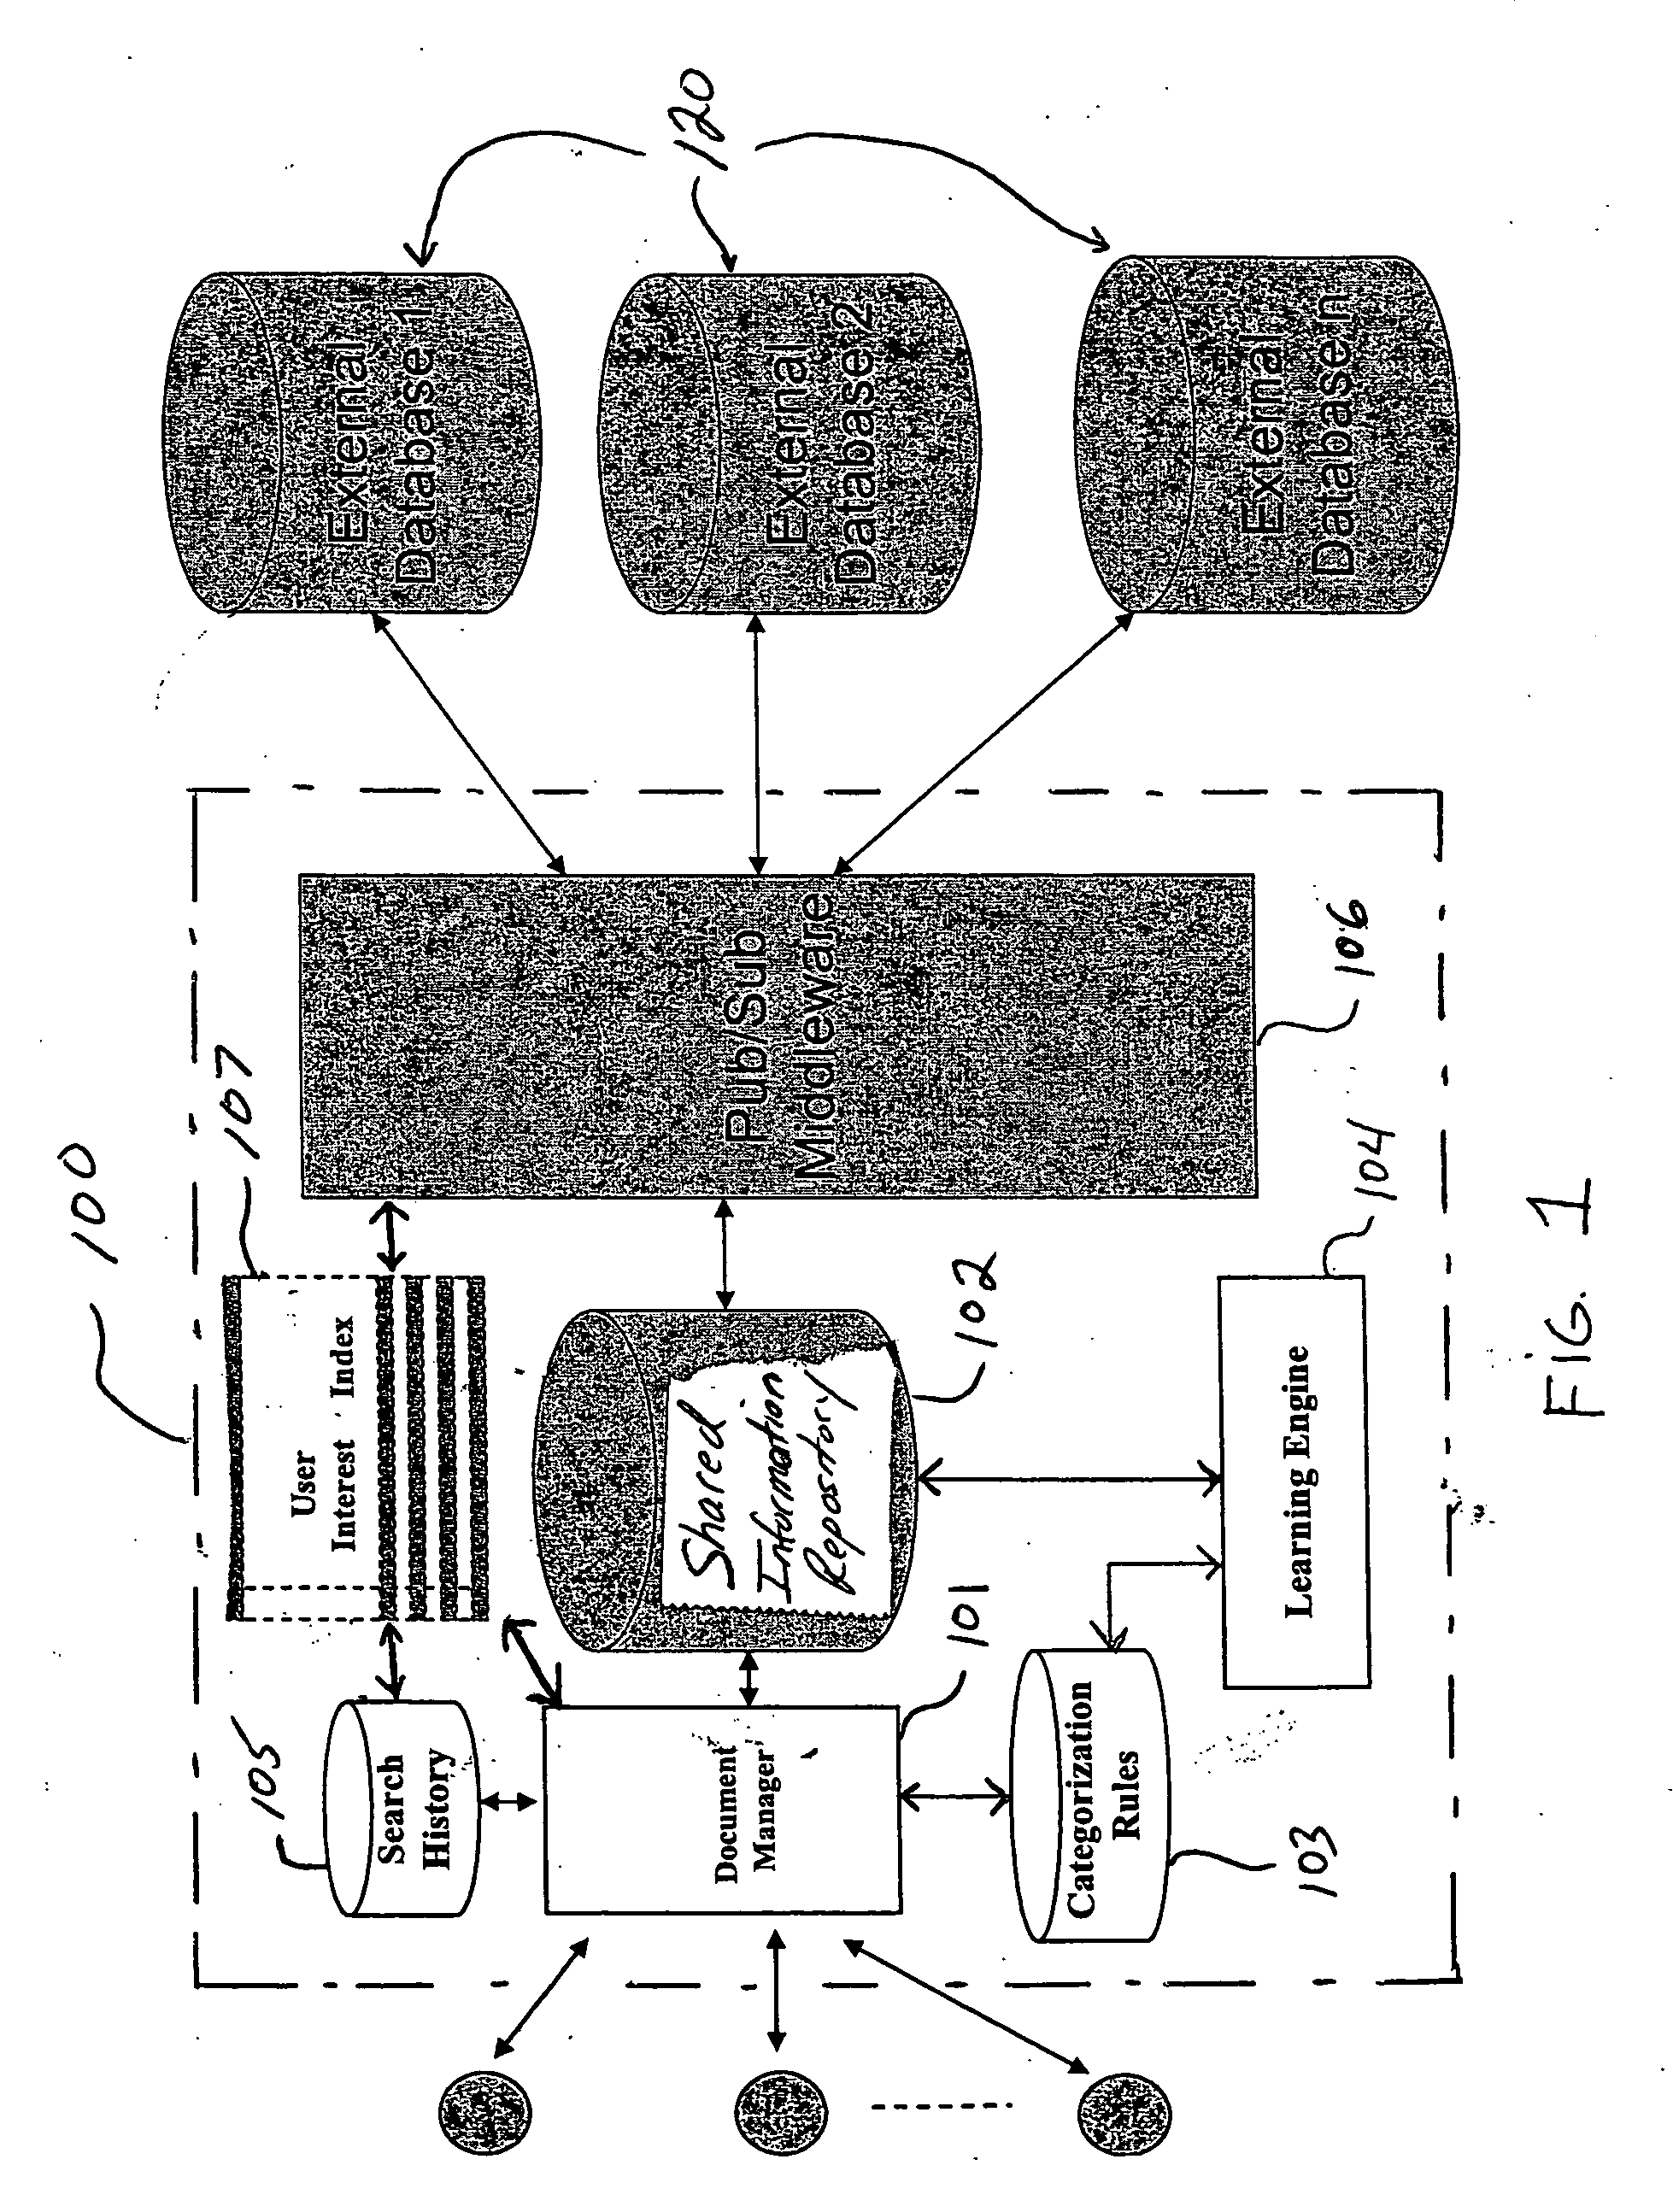 Systems and methods for building and implementing ontology-based information resources